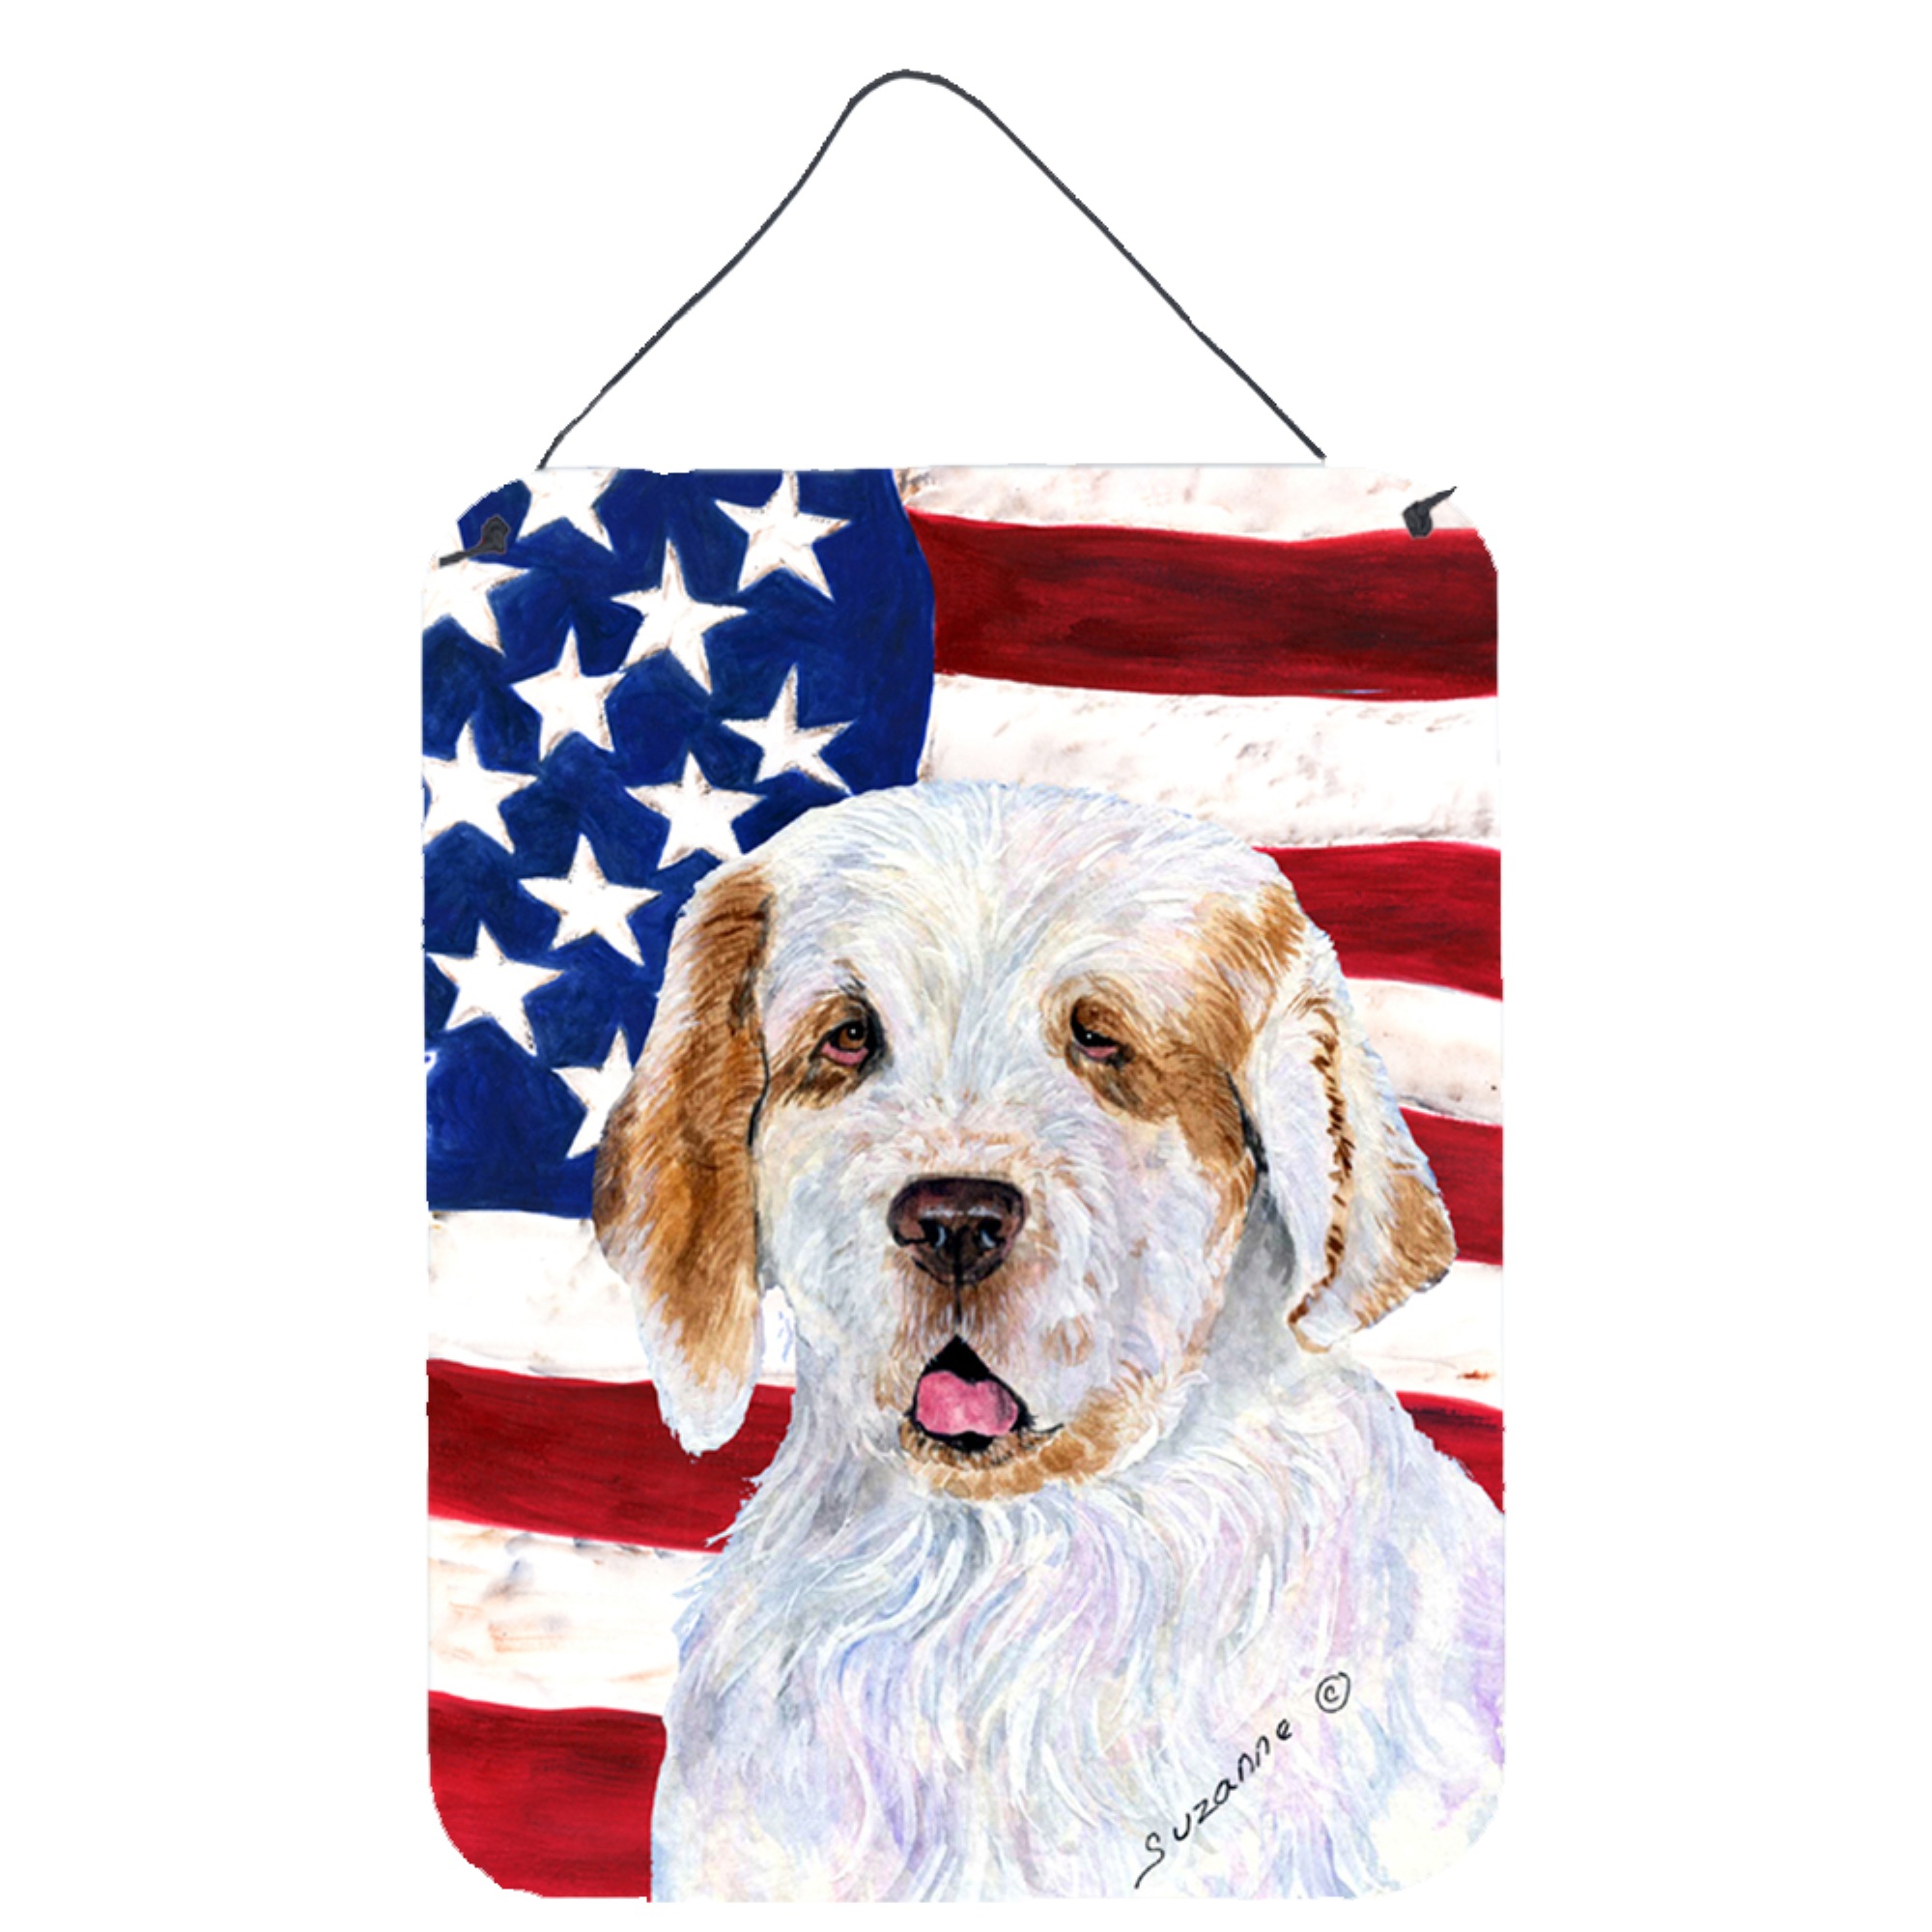 Caroline's Treasures "Caroline's Treasures Usa American Flag with Clumber Spaniel Wall or Door Hanging Prints, 16"" x 12"", Multicolor"